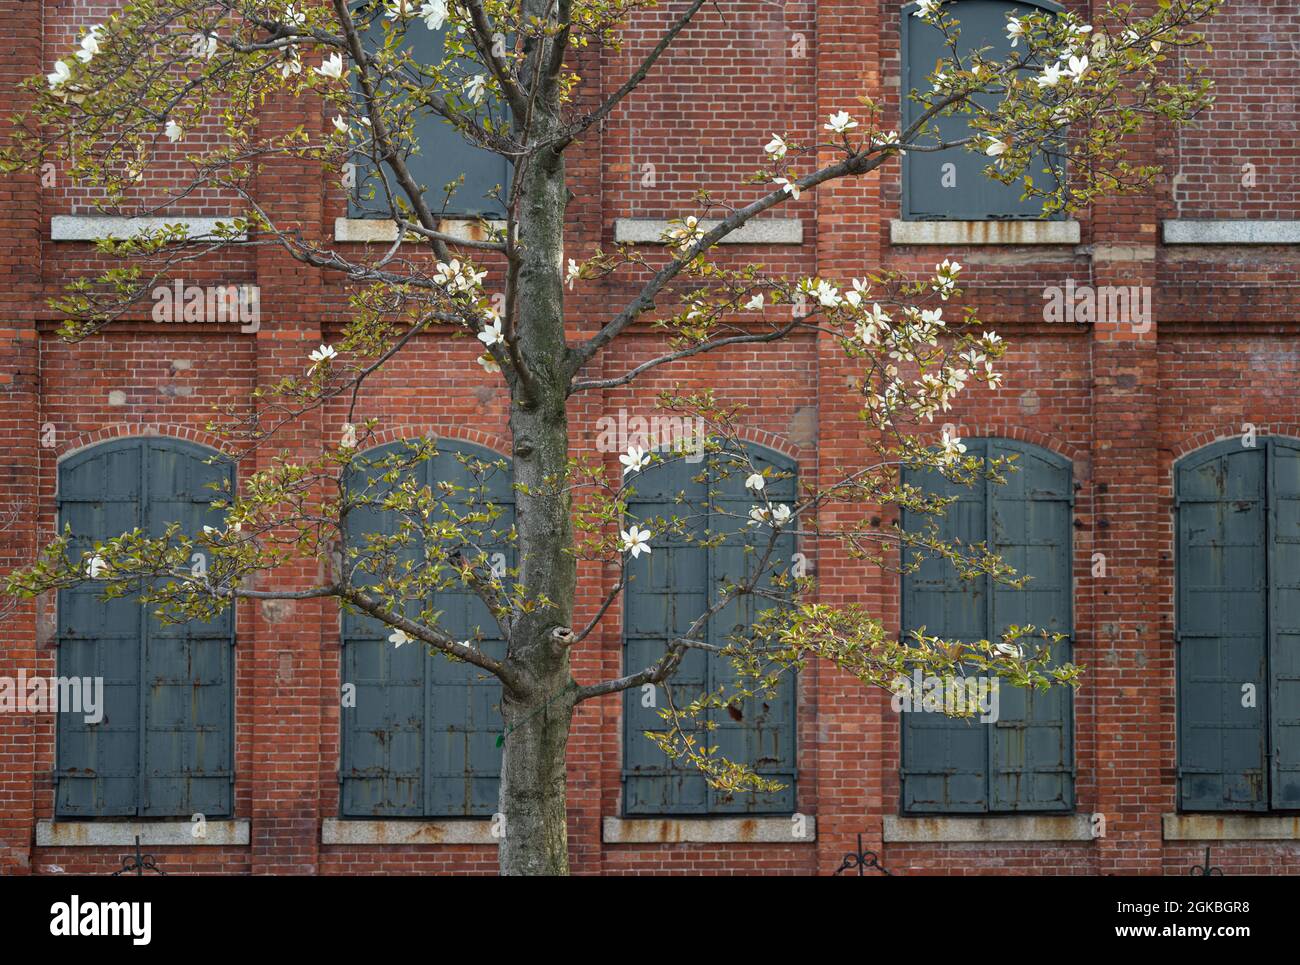 Blooming Magnolia Kobus tree in front of red brick building with iron window shutters. Spring time. Stock Photo